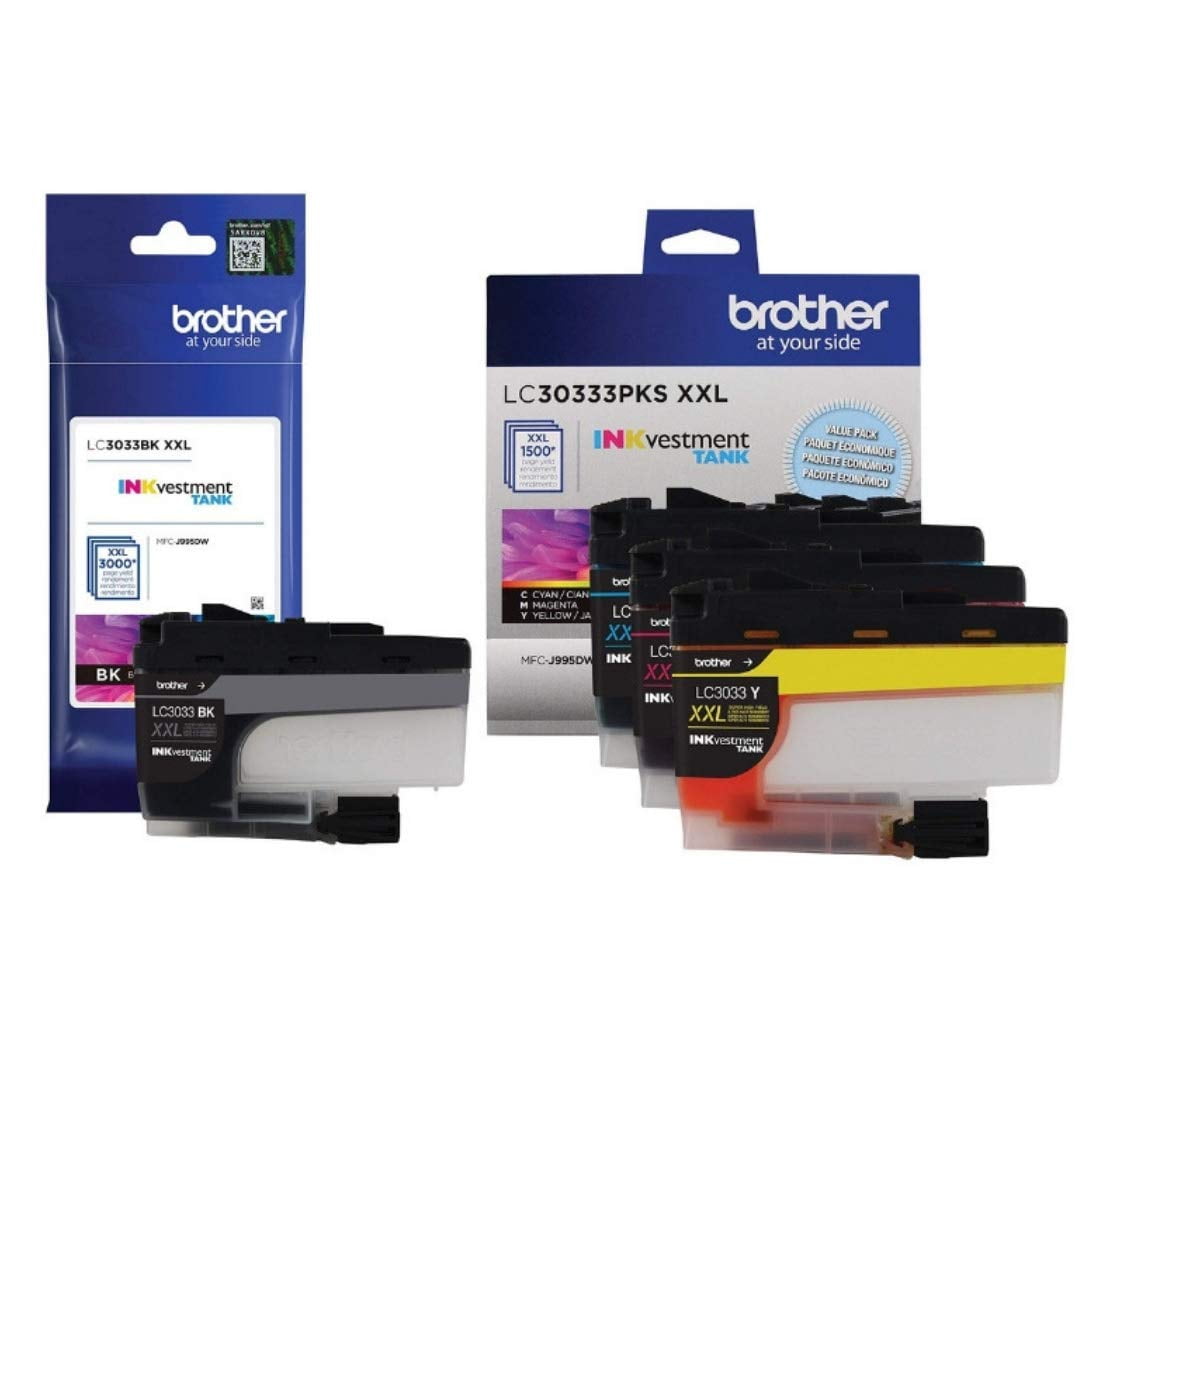 Brother LC3033 BK/C/M/Y Super High Yield Ink-4 Pack 